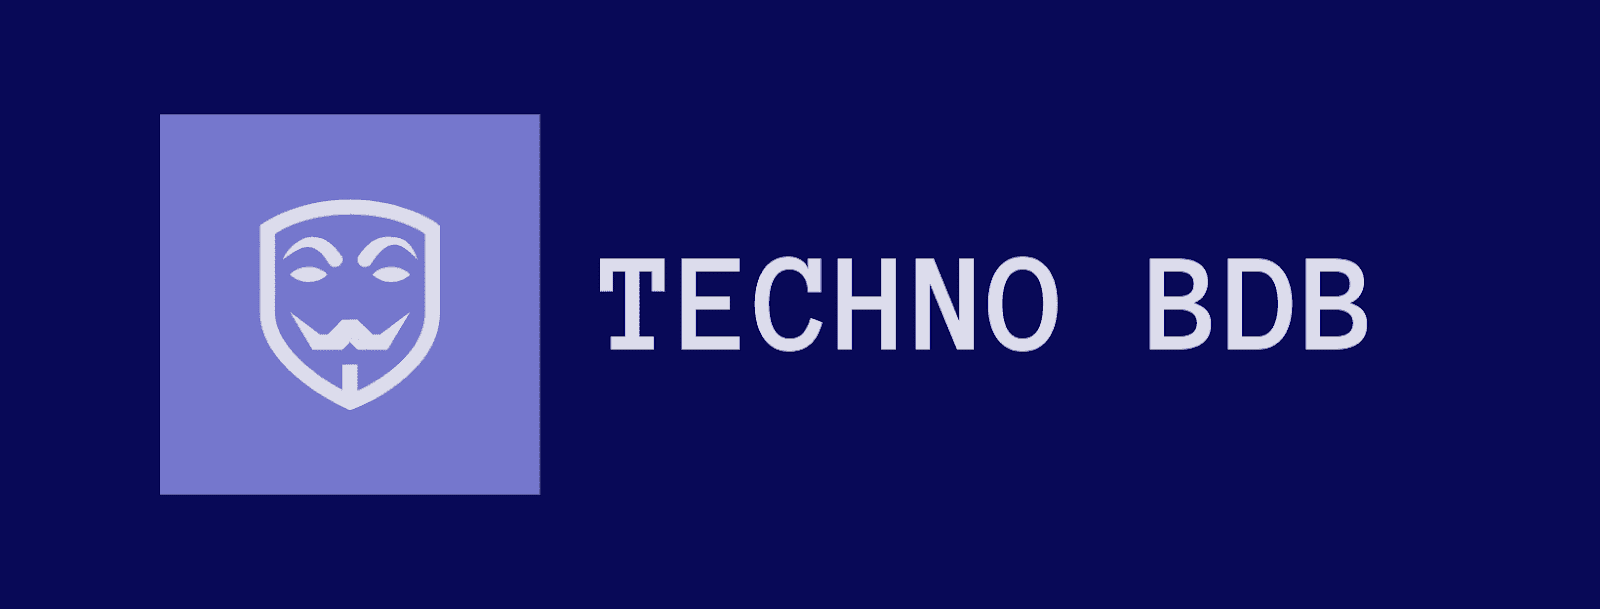 TECHNO BDB | Tutorial for Information and Technology 